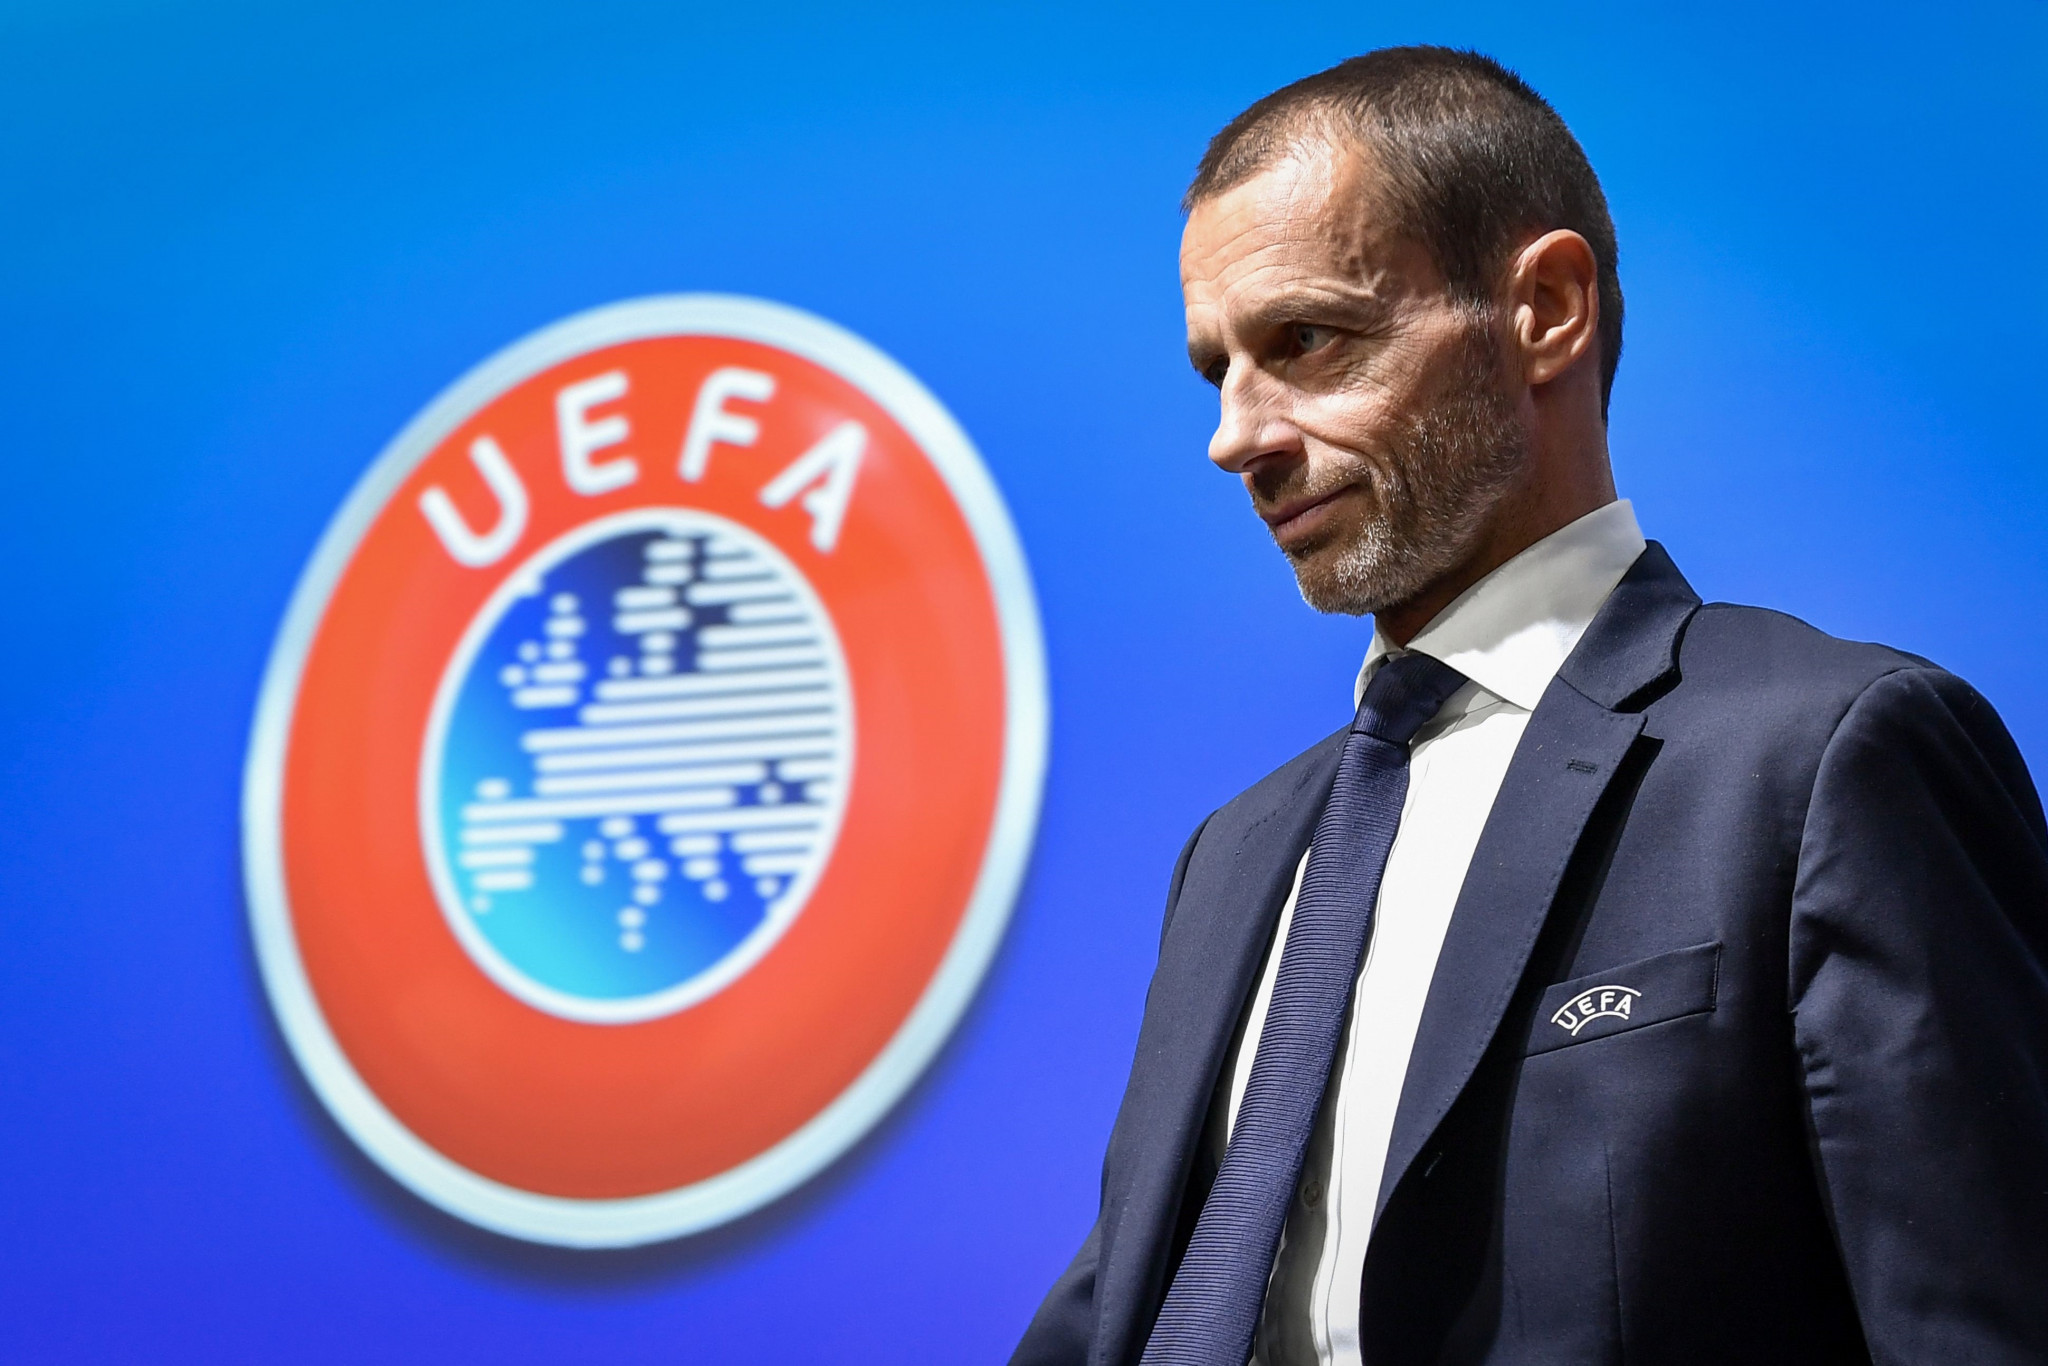 UEFA President Aleksander Čeferin said the health of fans, staff and players has to be the continental governing body's number one priority ©Getty Images